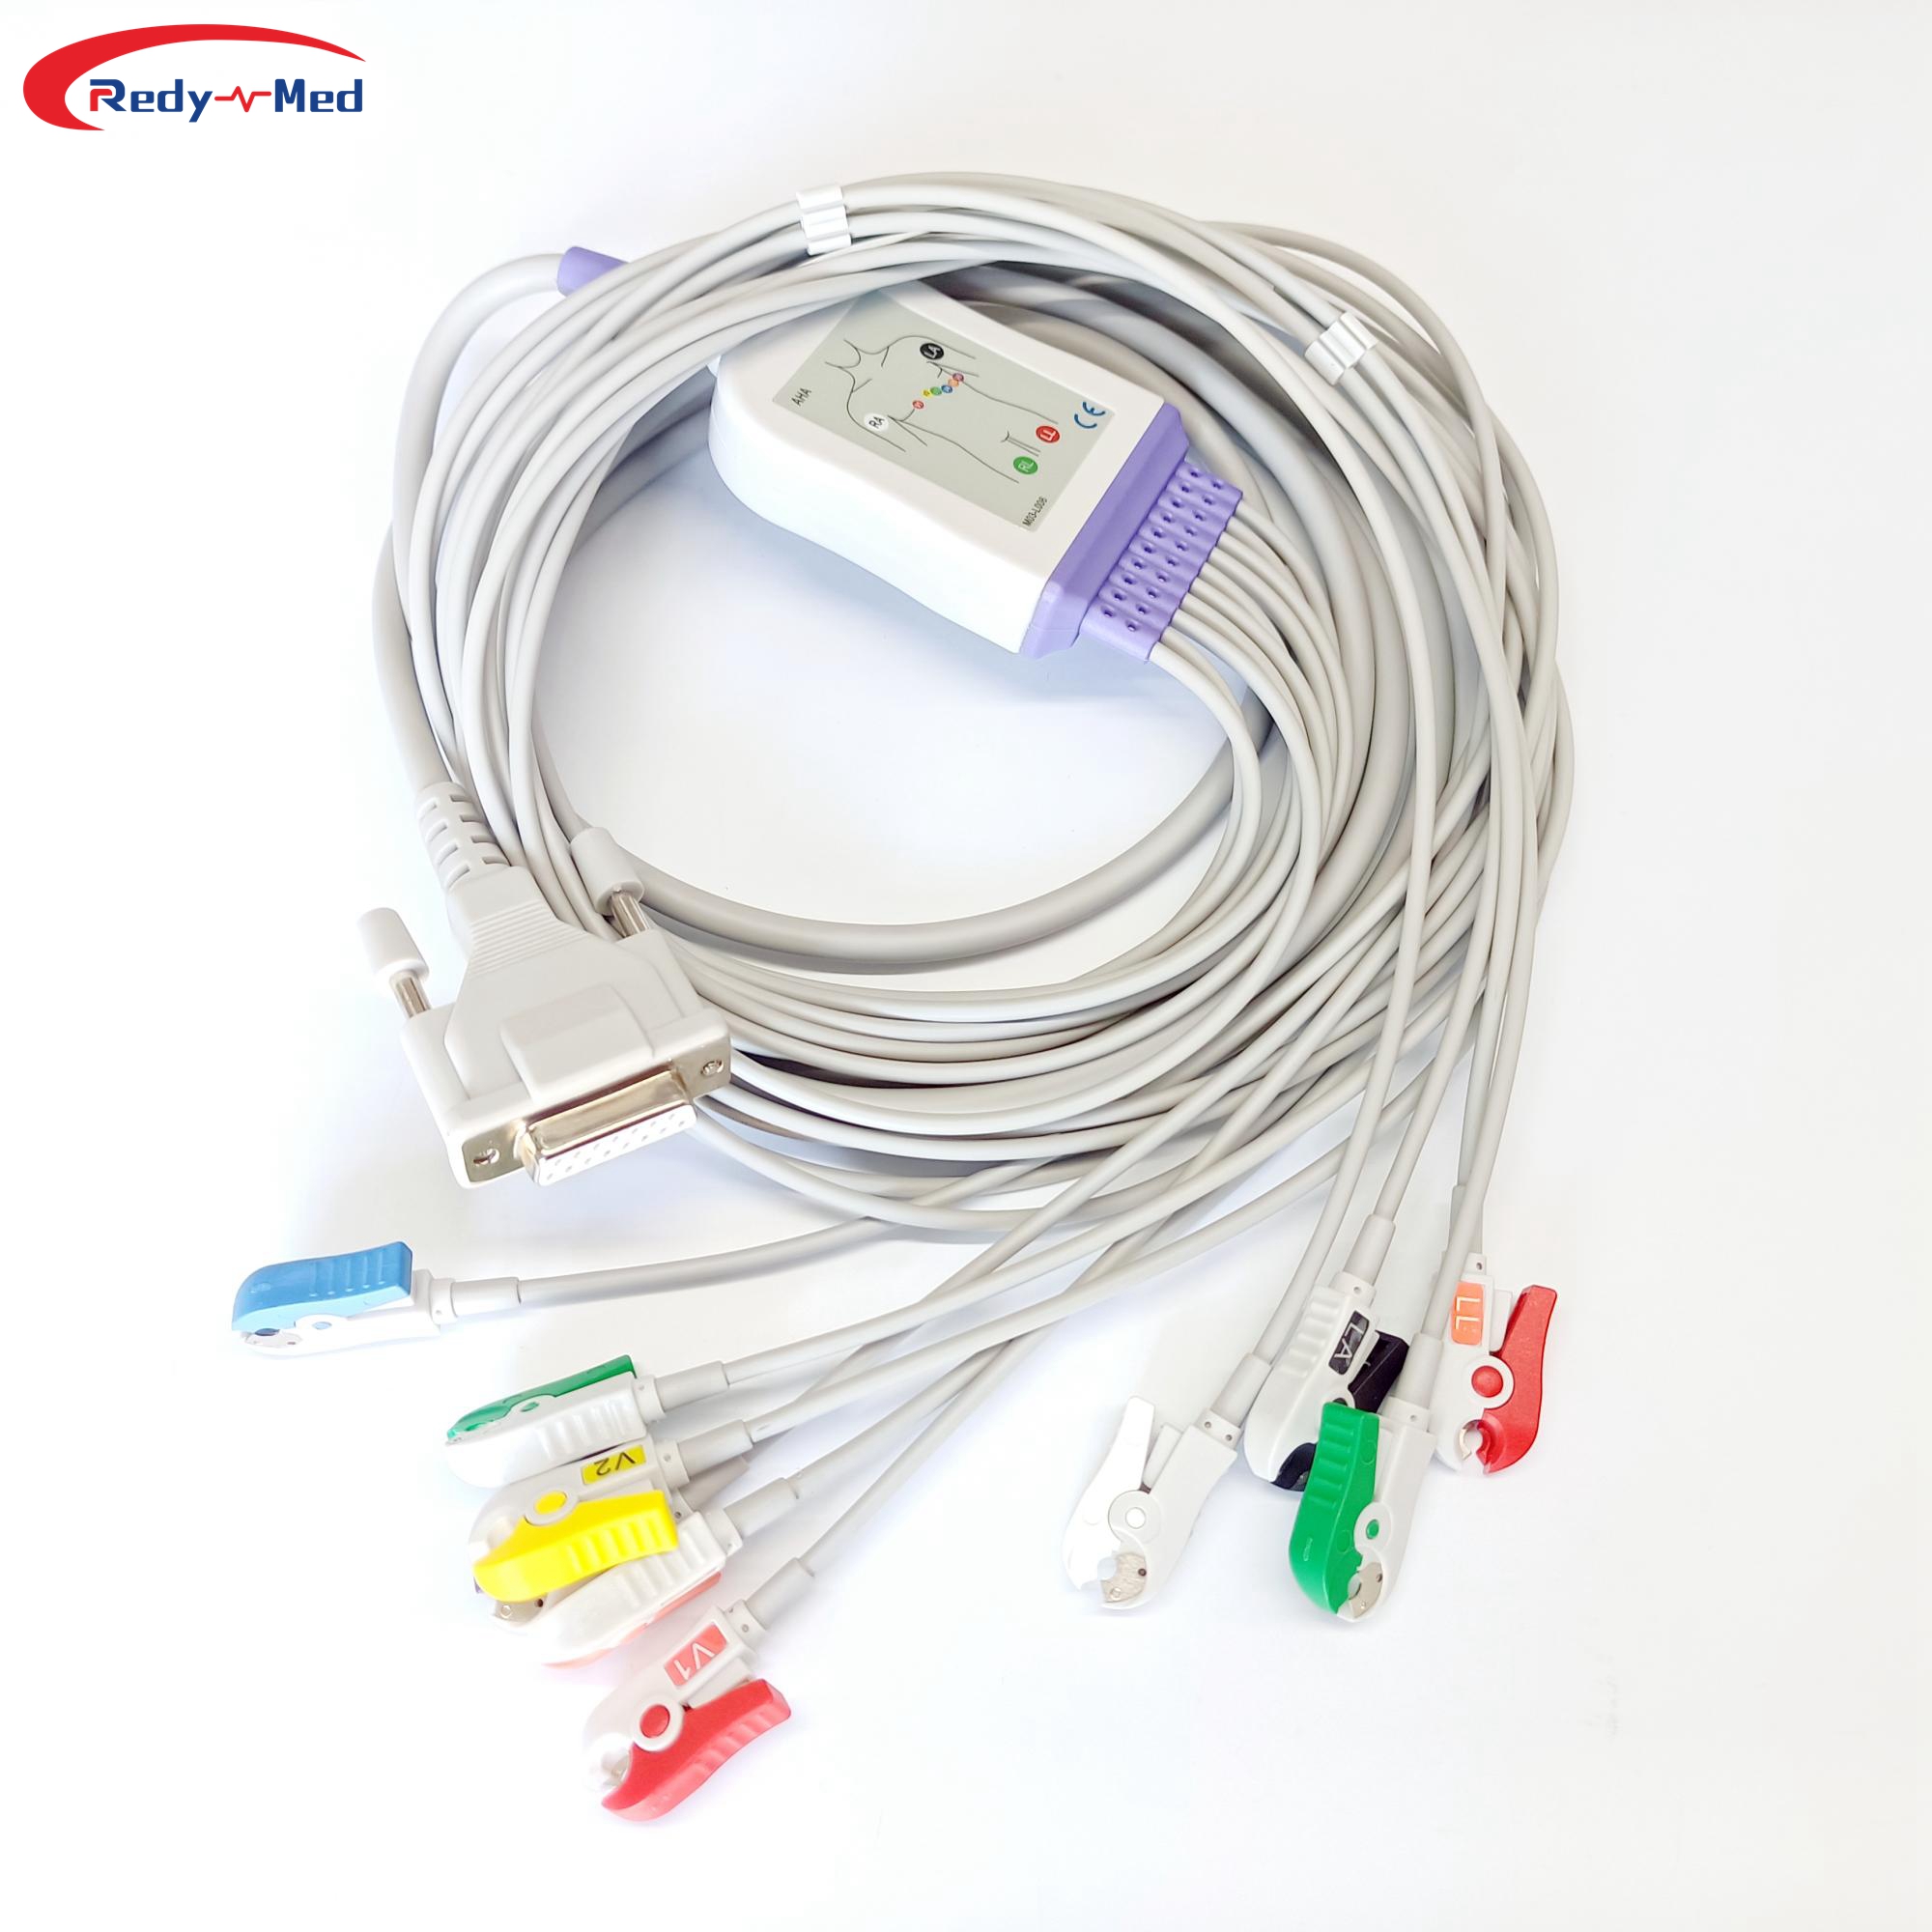 Compatible With Dixtal EP-3 EP-12 10 Lead/12 Lead EKG Cables and Leadwires